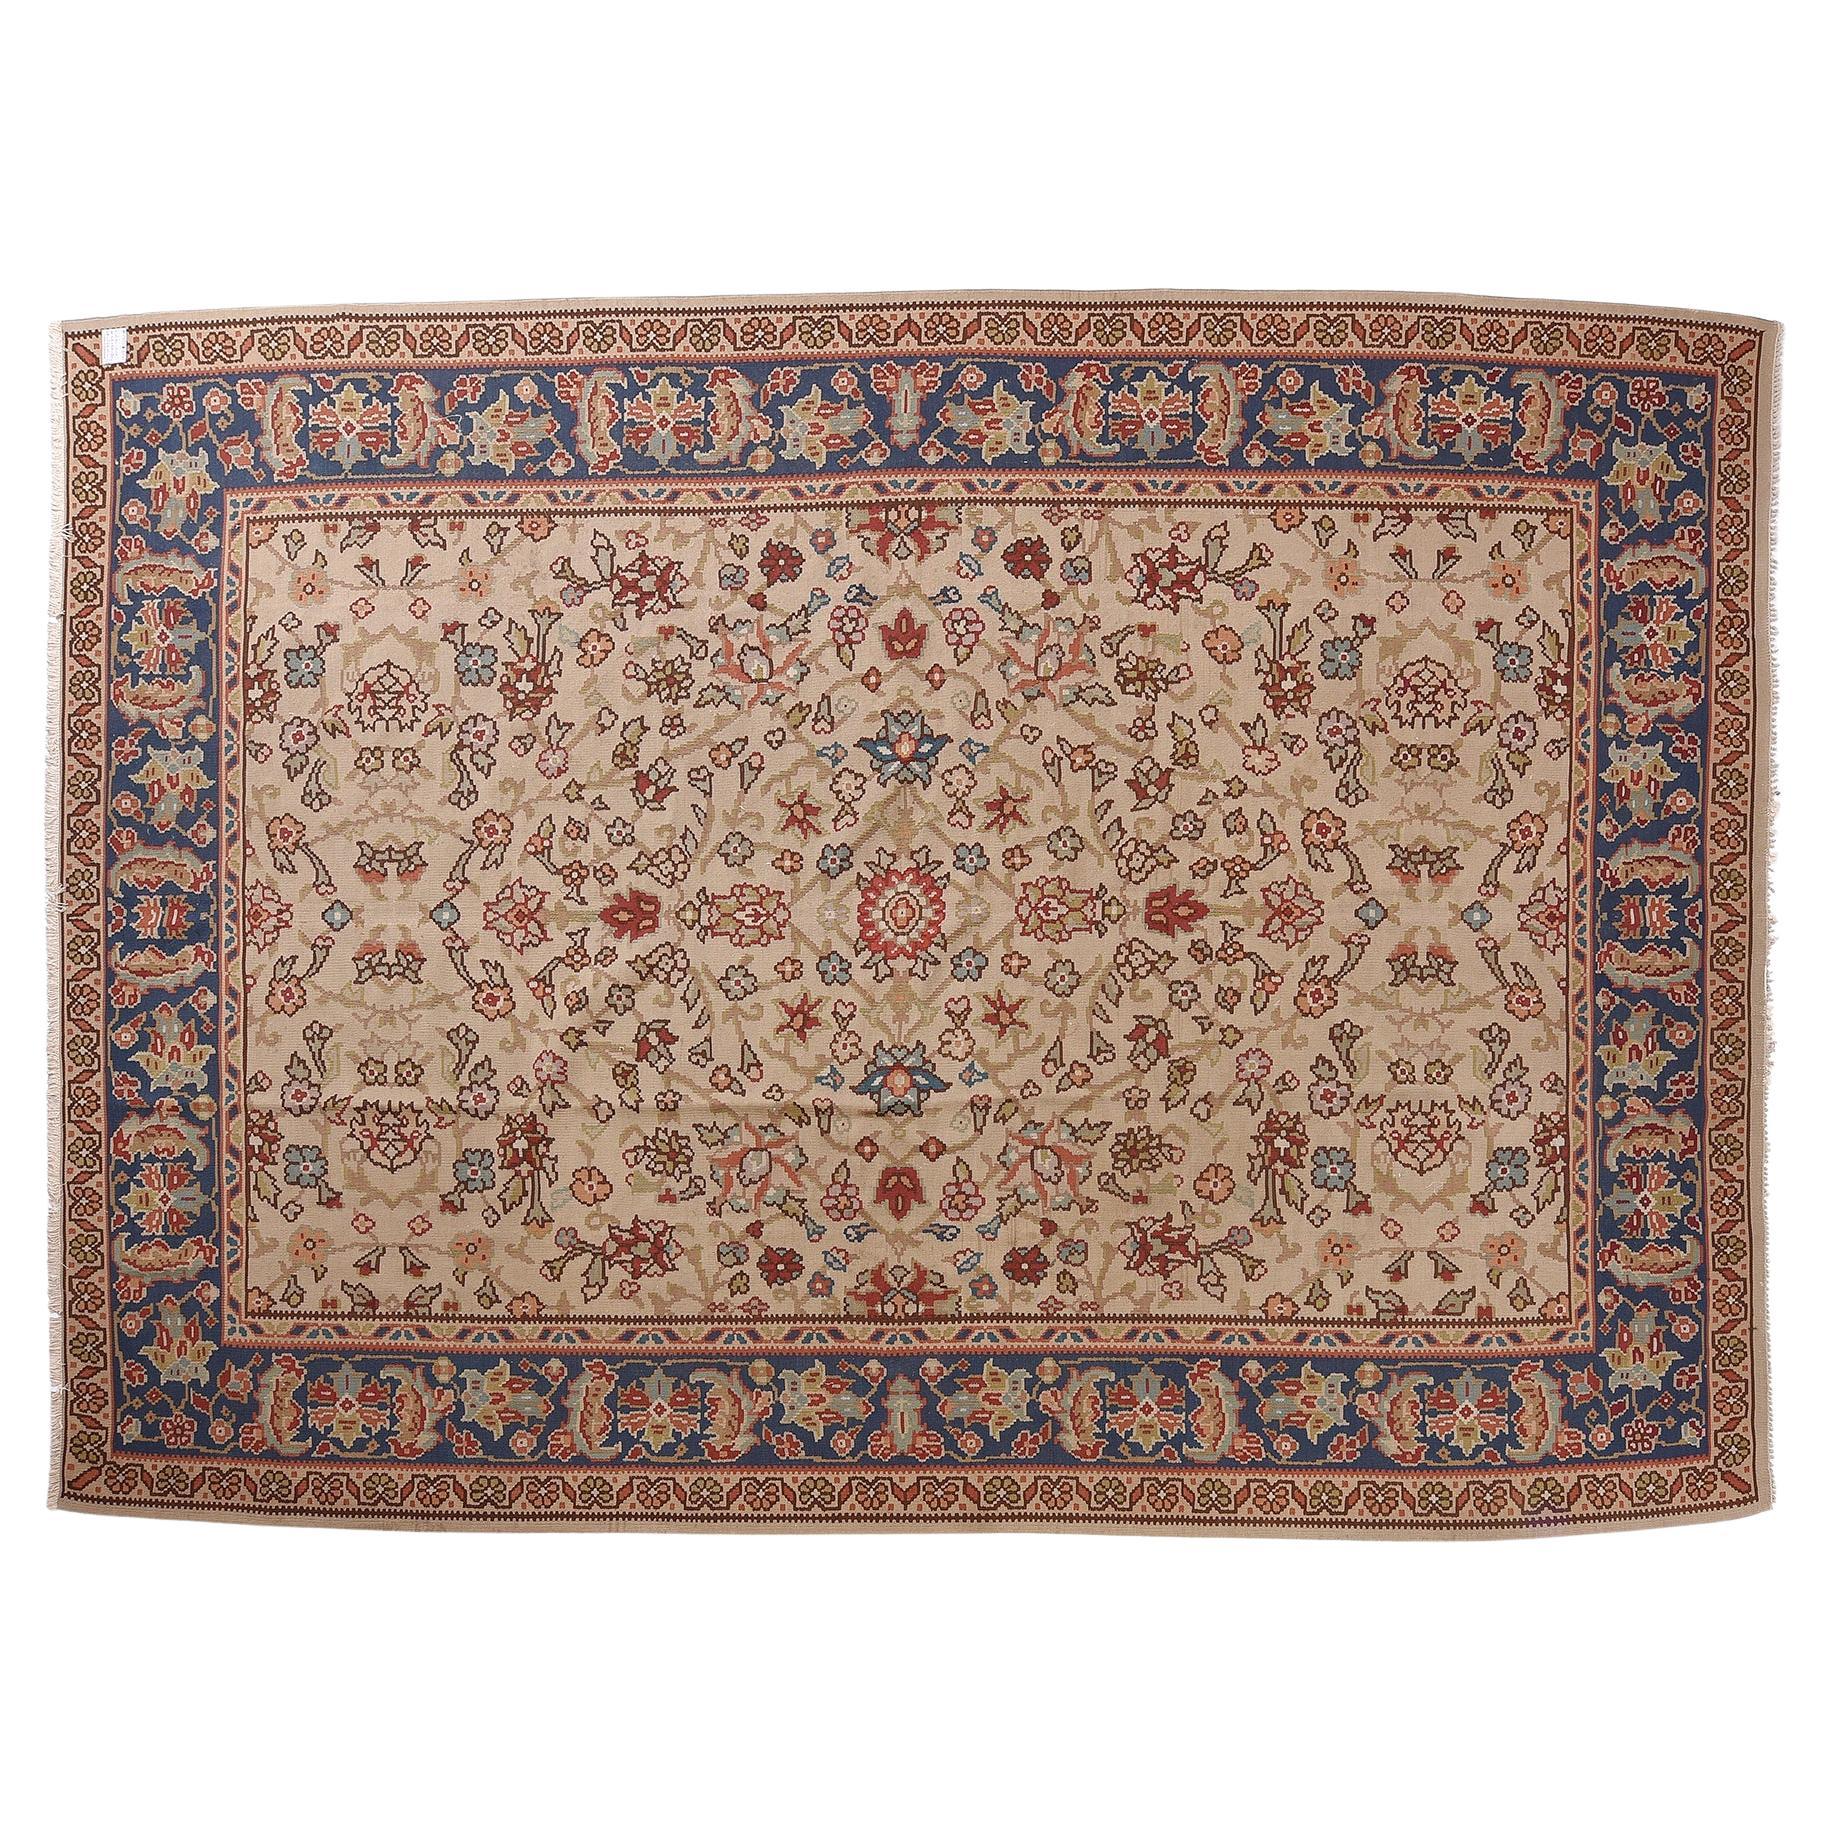 nr. 644 - Elegant Turkish kilim, very particular and large. The background color is pearl grey, with an elegant light floral design; all enclosed in a beautiful blue frame with stylizedleaves and flowers.
Very interesting price  for closing